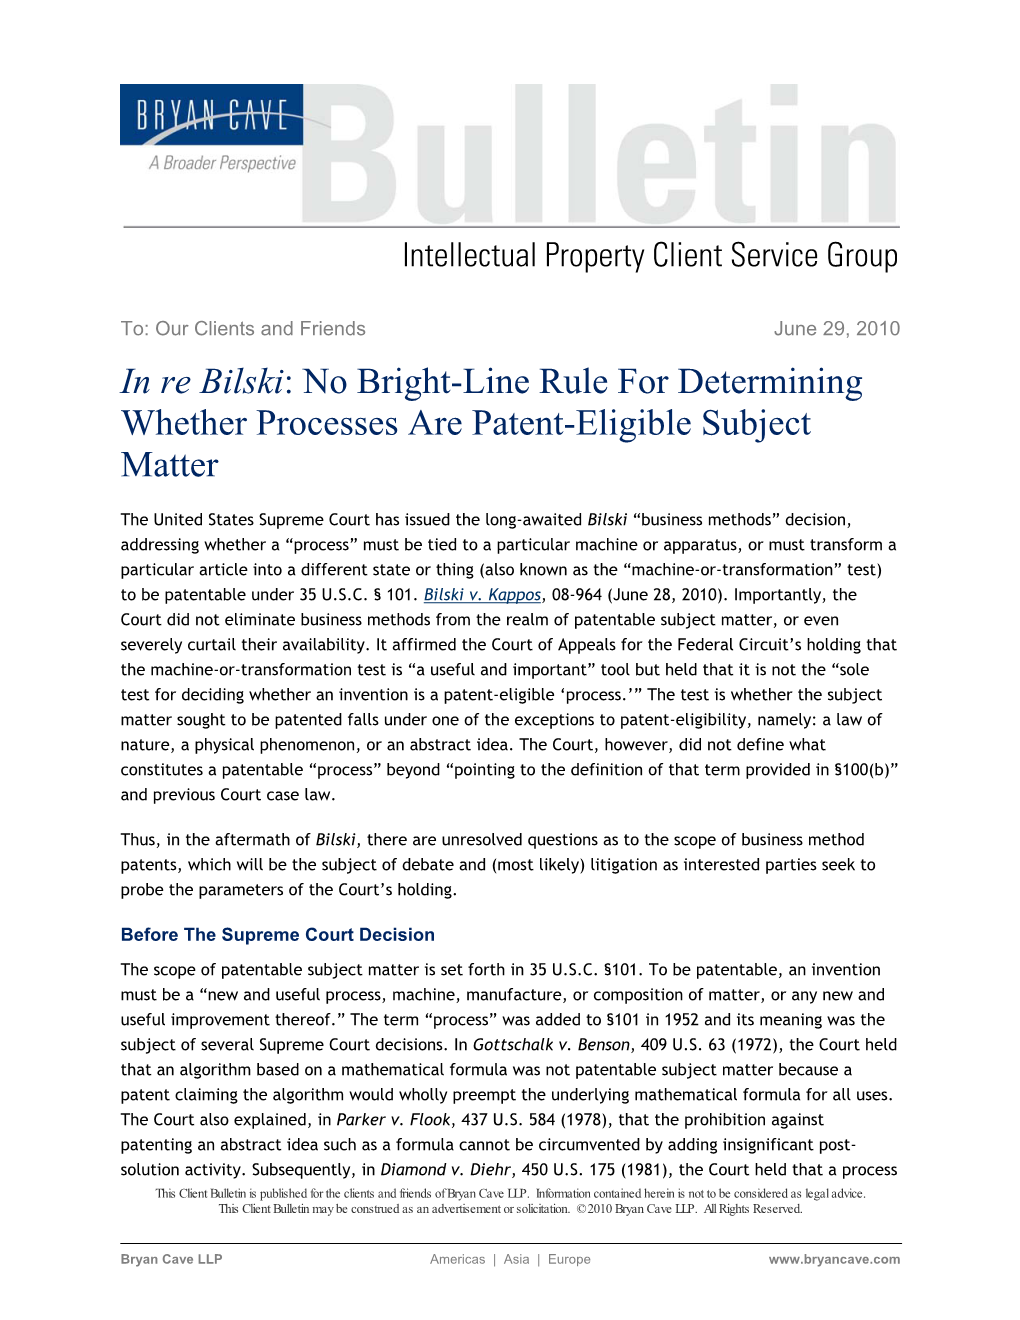 In Re Bilski: No Bright-Line Rule for Determining Whether Processes Are Patent-Eligible Subject Matter